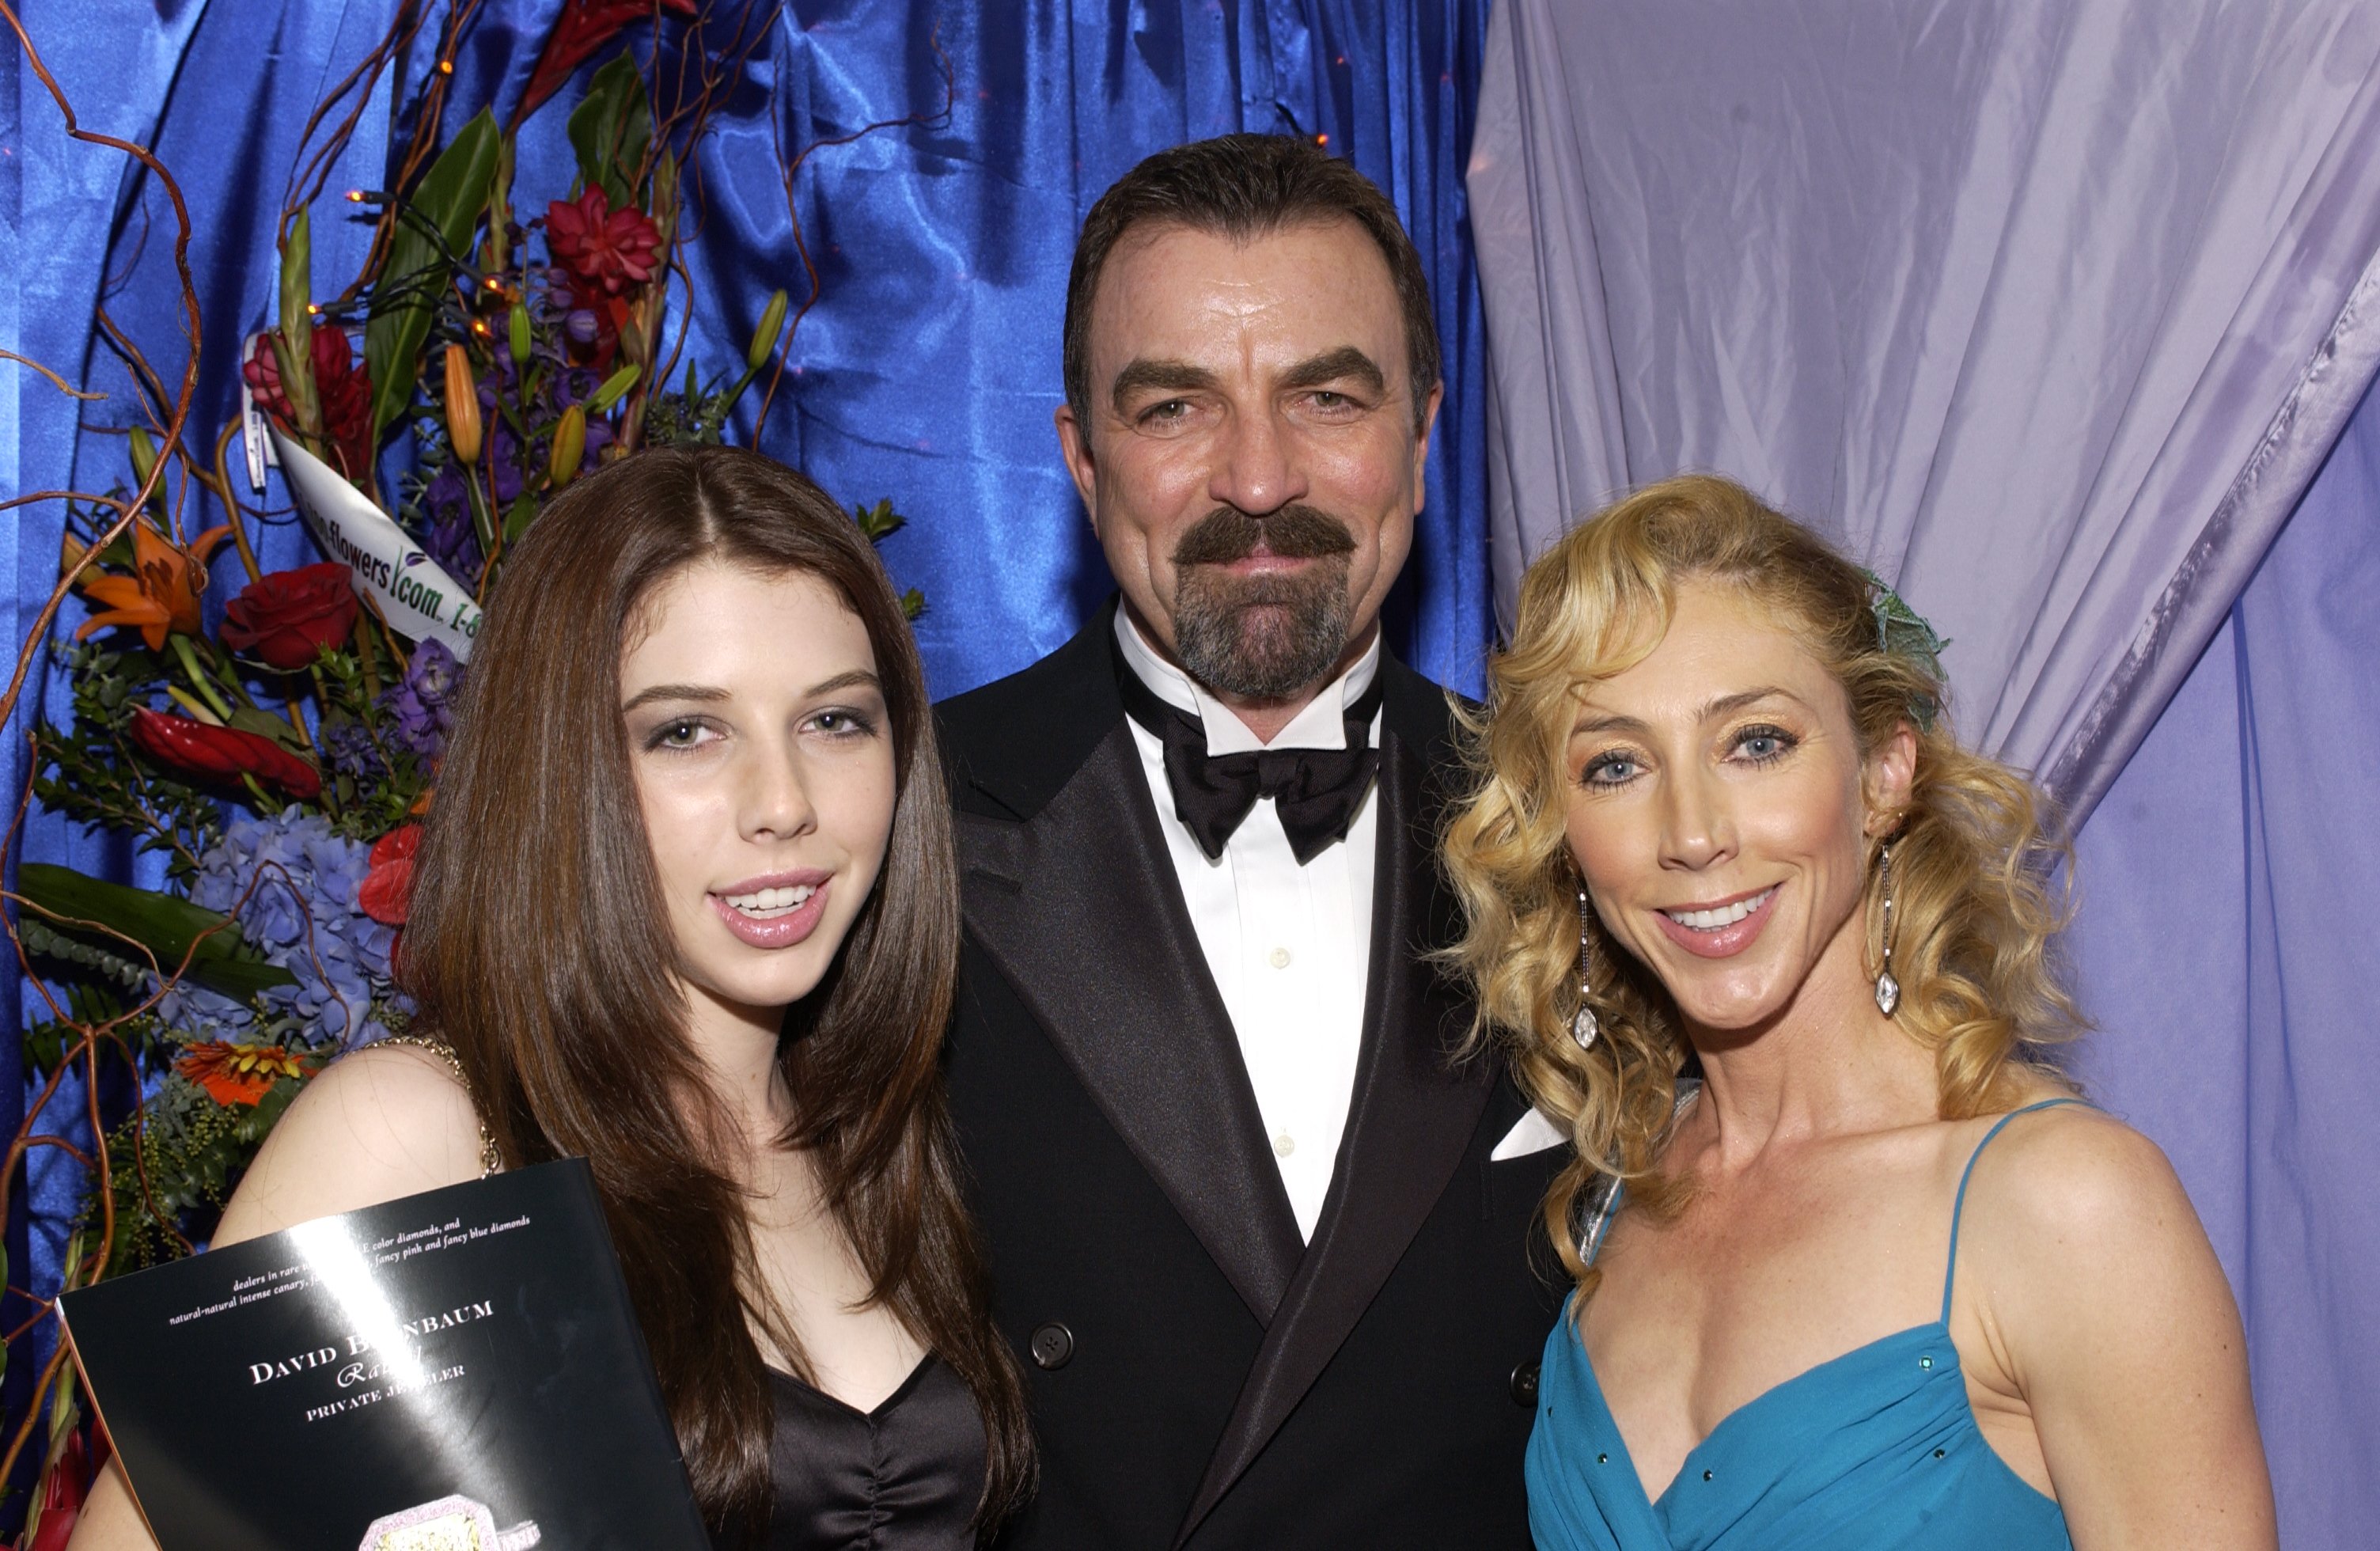 Tom Selleck with daughter Hannah (left) and wife Jillie Mack (right) at the People's Choice Awards on January 9, 2005 in Pasadena, California. | Photo: Getty Images